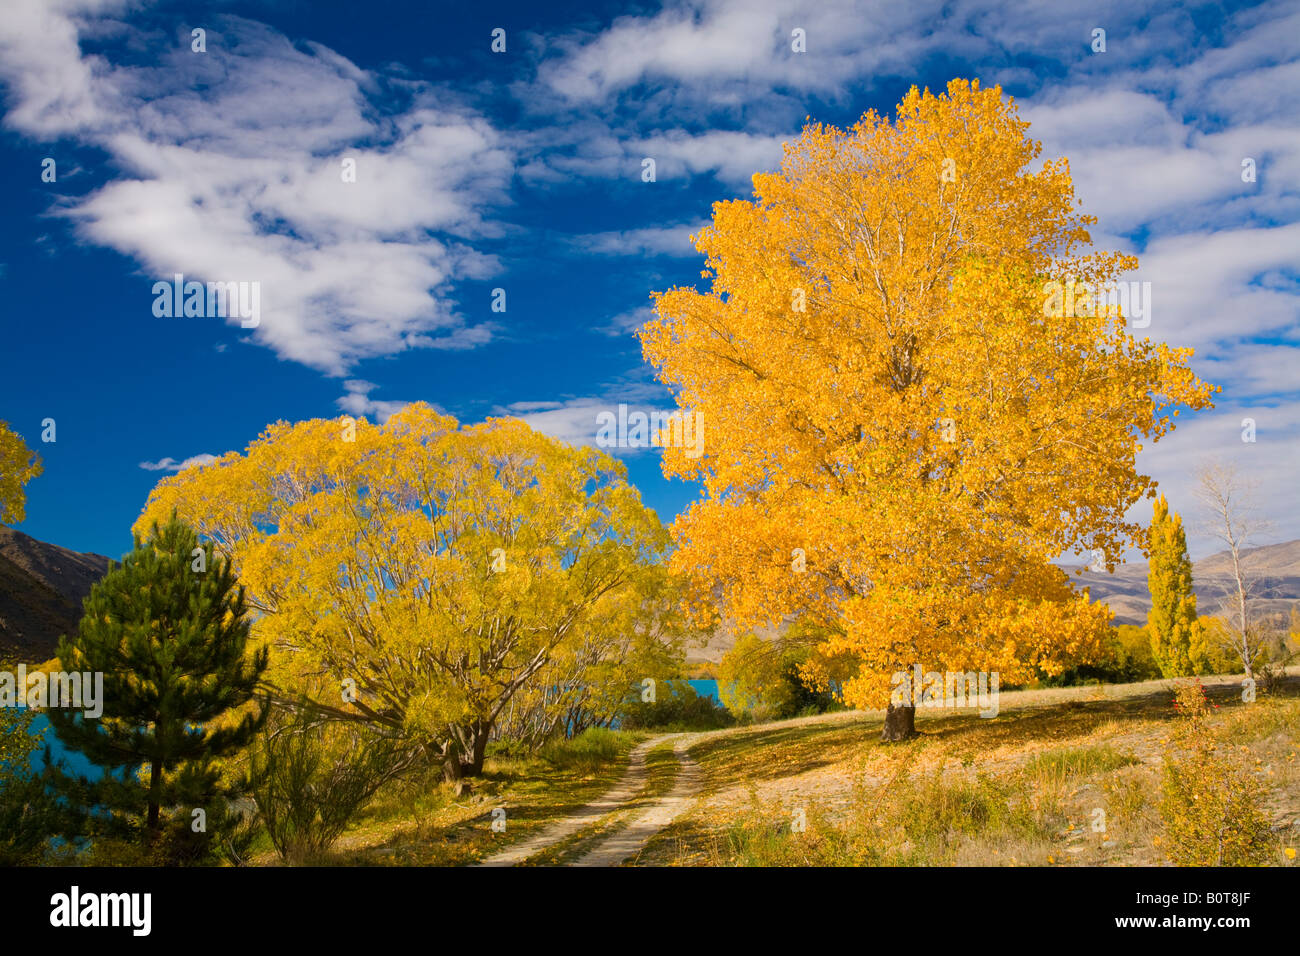 A autumnal scene in Central Otago, New Zealand Stock Photo